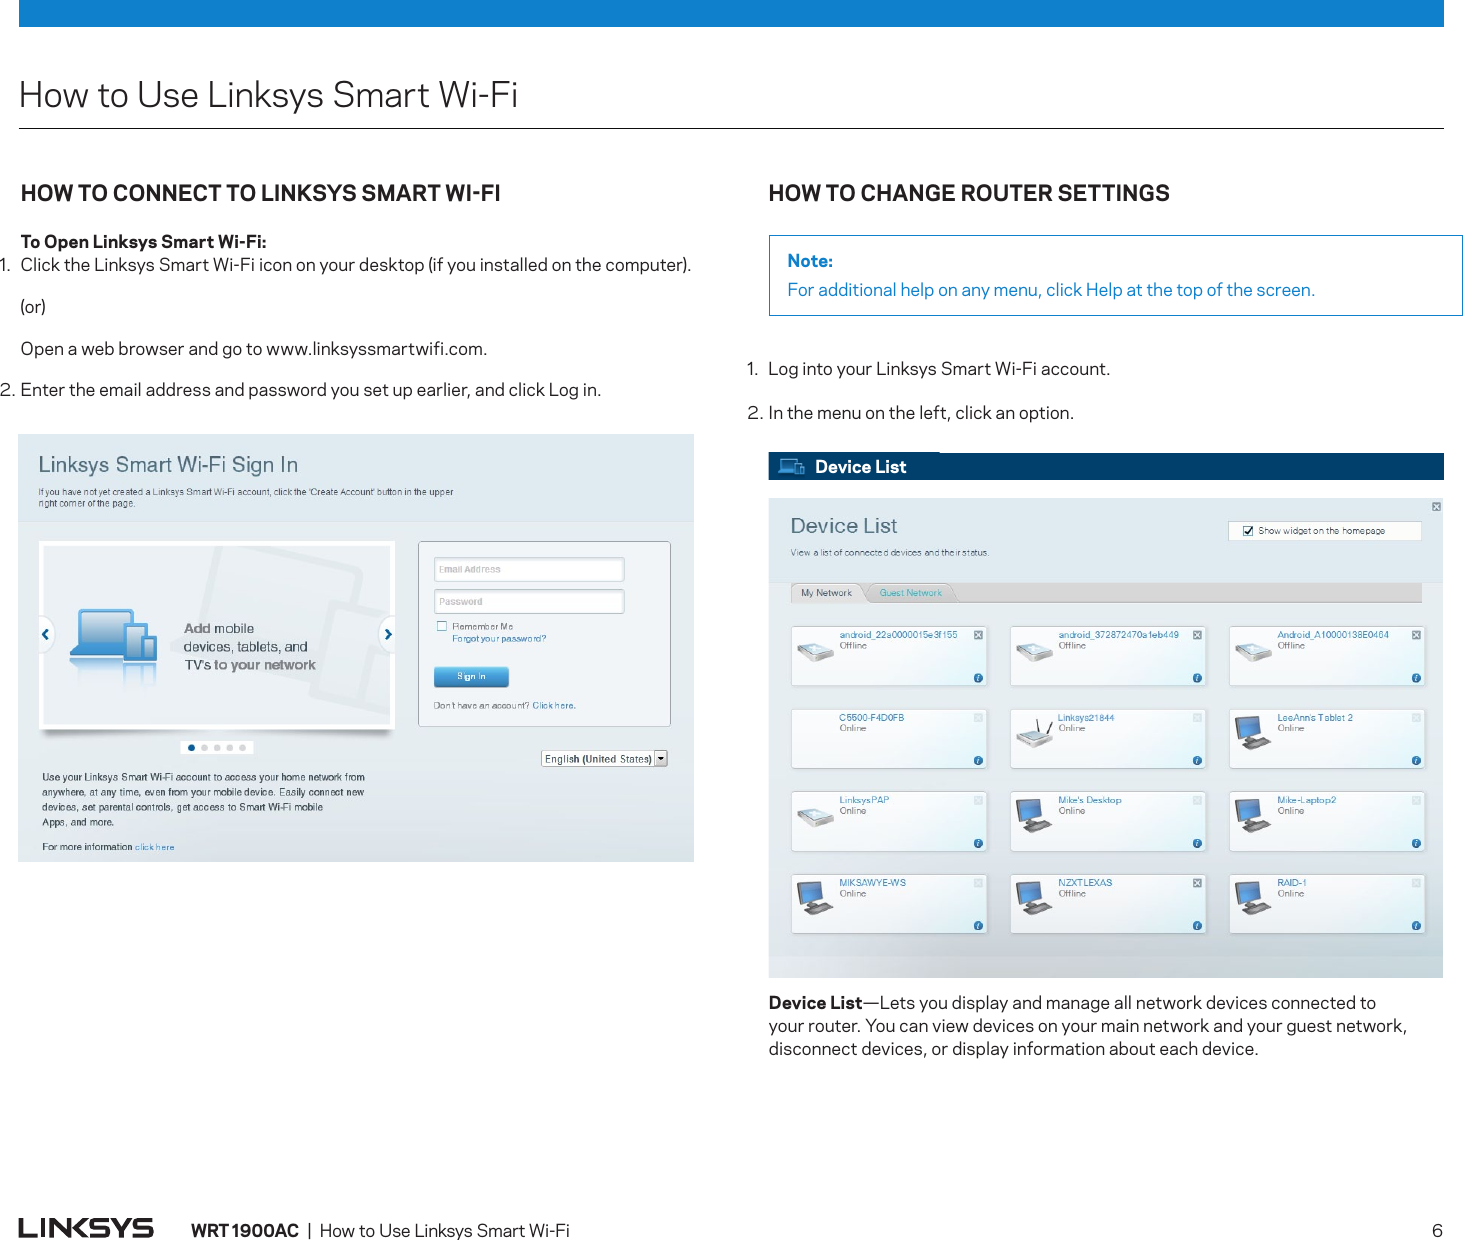 HowtoUseLinksysSmartWi-FiDevice List Device  List—Letsyoudisplayandmanageallnetworkdevicesconnectedtoyourrouter.Youcanviewdevicesonyourmainnetworkandyourguestnetwork,disconnectdevices,ordisplayinformationabouteachdevice.WRT 900AC|HowtoUseLinksysSmartWi-Fi 6HOW TO CHANGE ROUTER SETTINGSNote:Foradditionalhelponanymenu,clickHelpatthetopofthescreen.1. LogintoyourLinksysSmartWi-Fiaccount.2.Inthemenuontheleft,clickanoption.HOW TO CONNECT TO LINKSYS SMART WIFI  To Open Linksys Smart Wi-Fi:1. ClicktheLinksysSmartWi-Fiicononyourdesktop(ifyouinstalledonthecomputer). (or) Openawebbrowserandgotowww.linksyssmartwifi.com.2.Entertheemailaddressandpasswordyousetupearlier,andclickLogin.